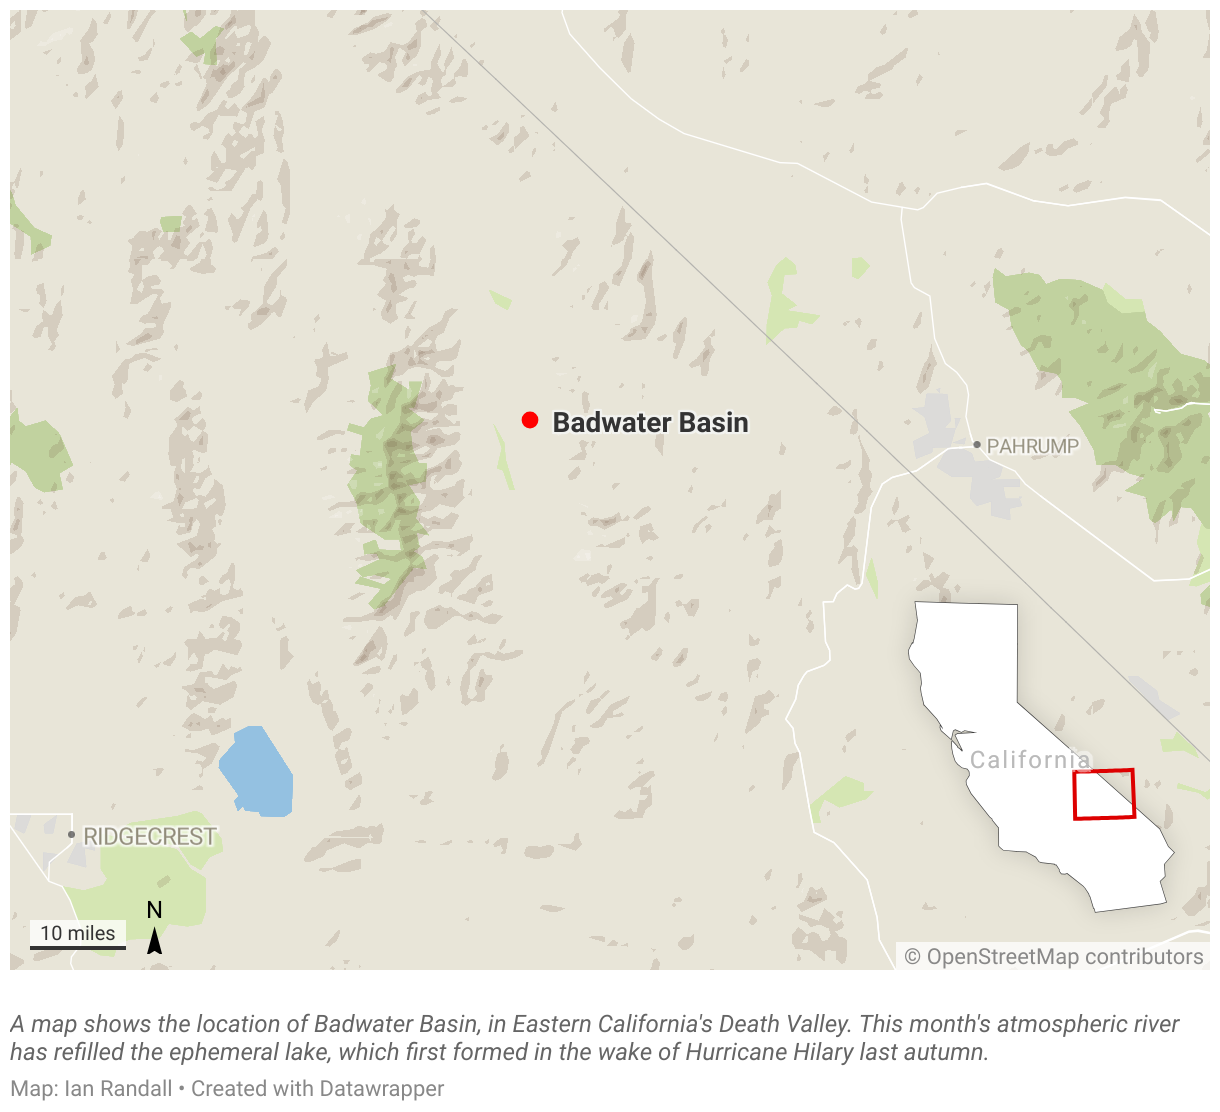 A map shows the location of Badwater Basin, in Eastern California's Death Valley.